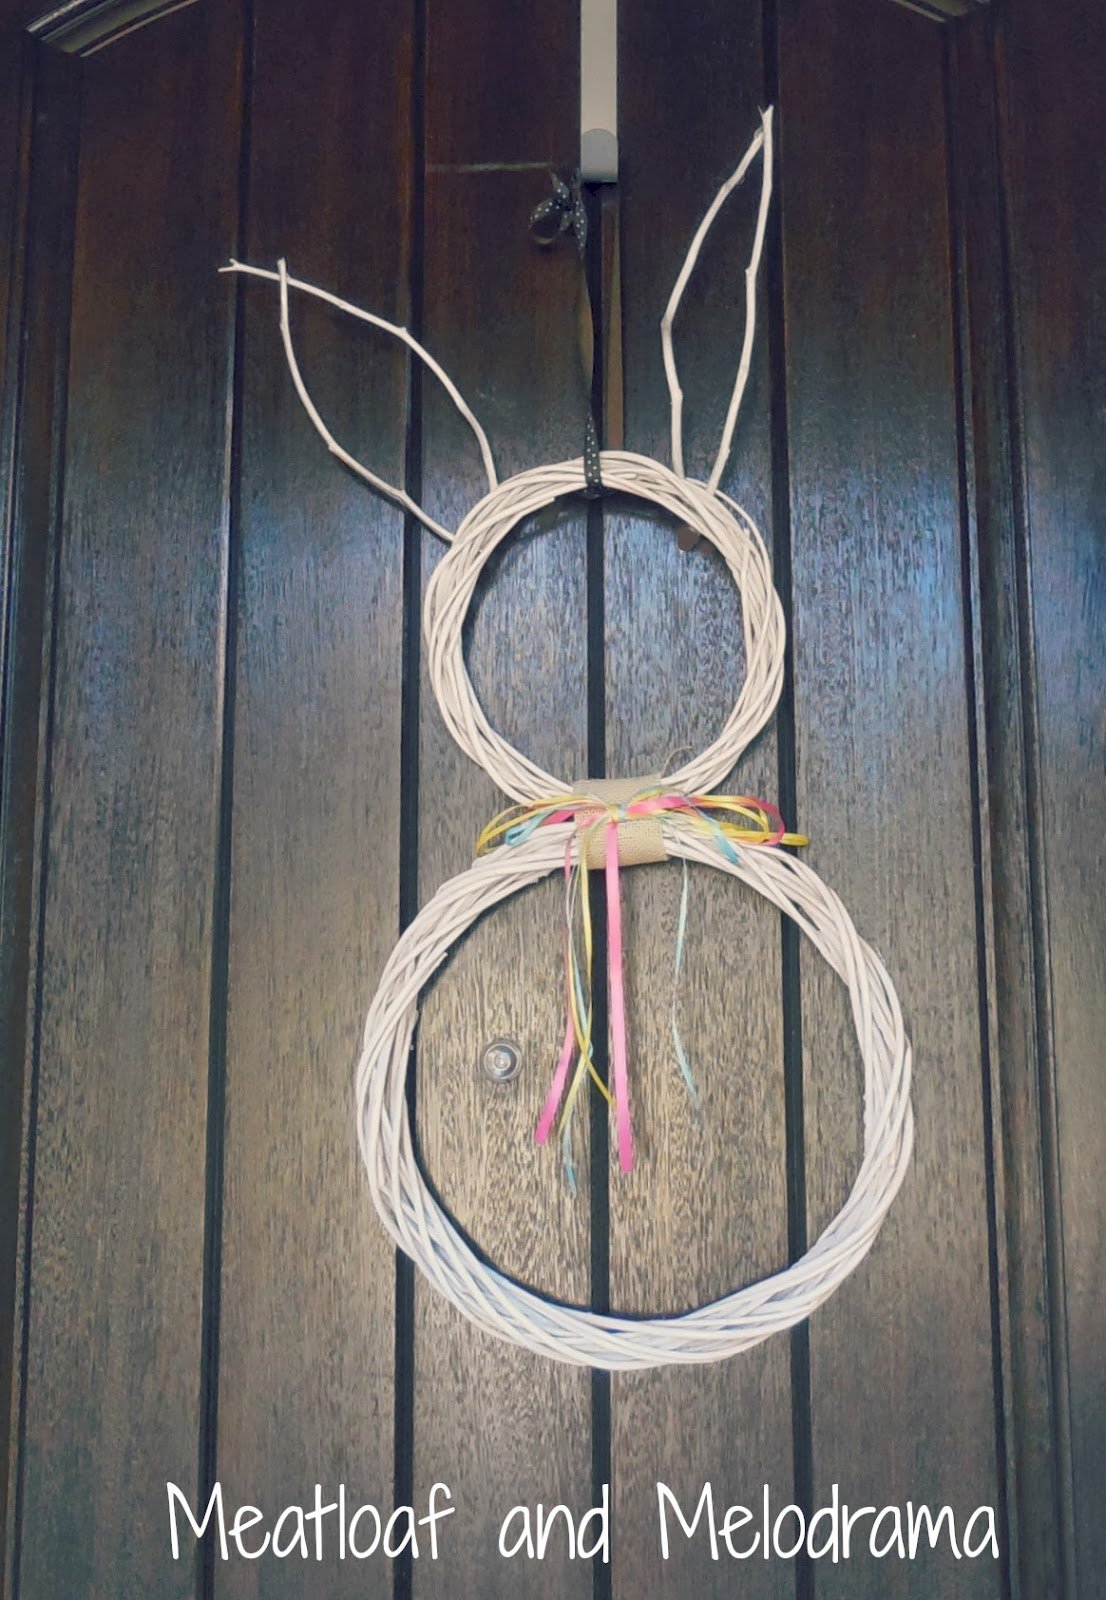 white bunny wreath, ribbons, twigs